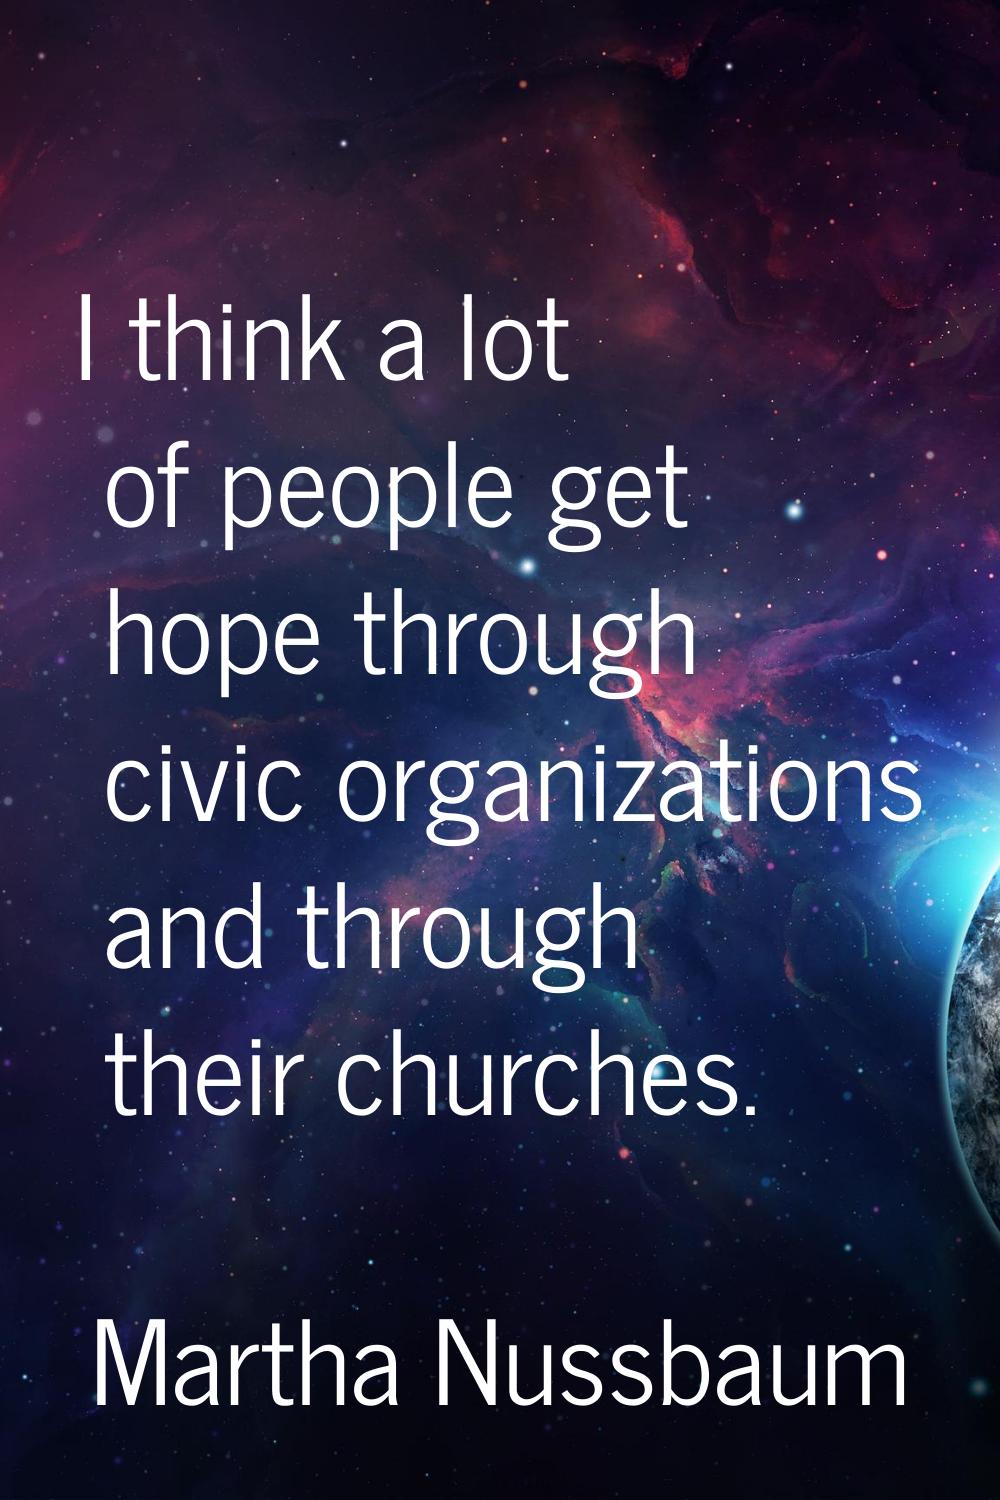 I think a lot of people get hope through civic organizations and through their churches.